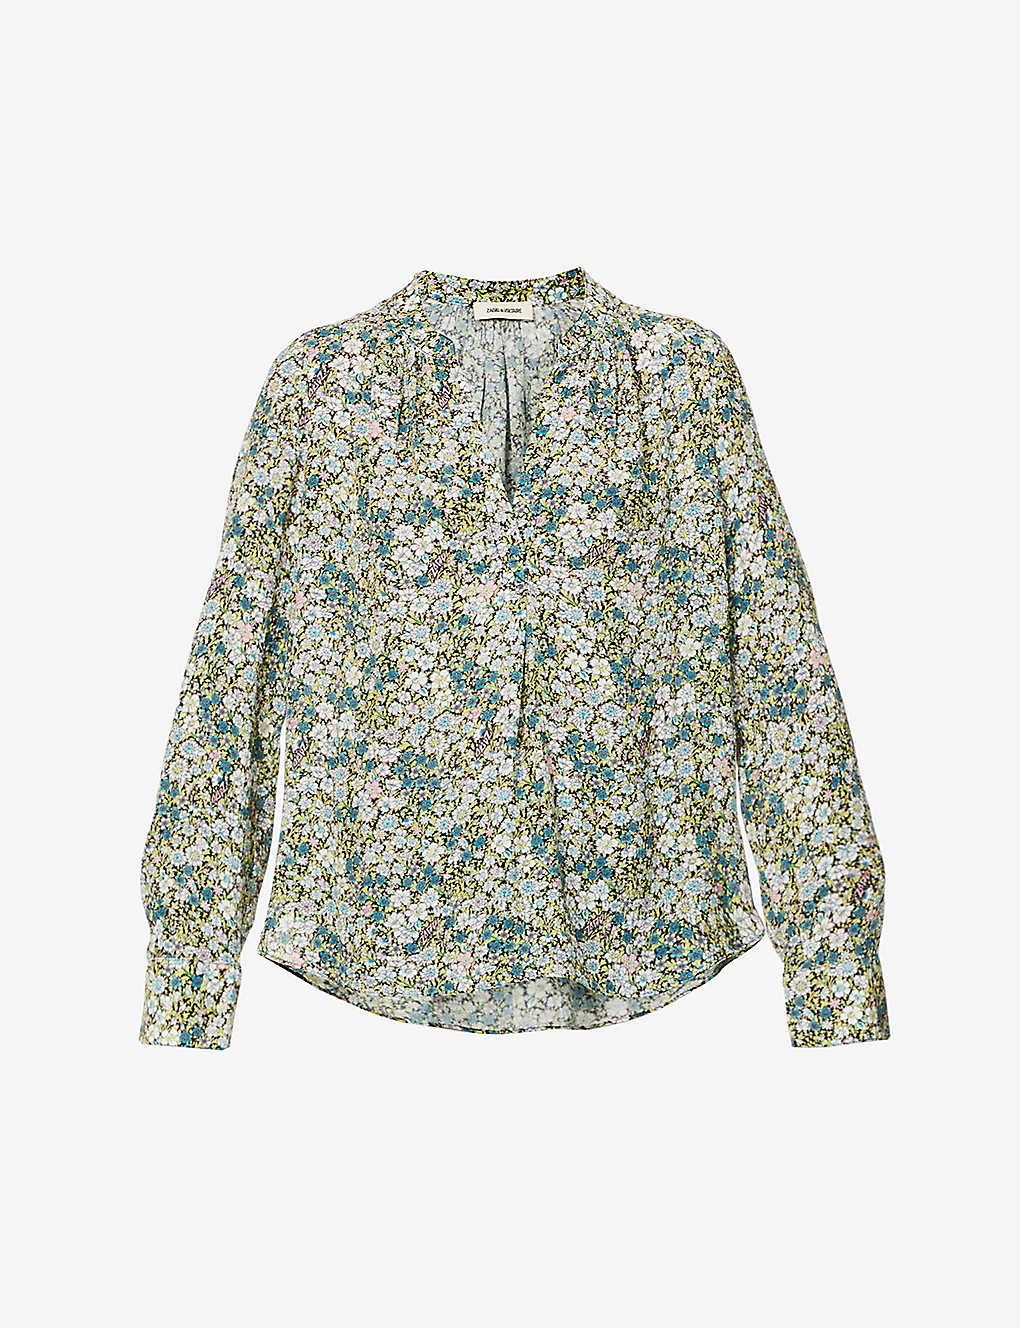 ZADIG & VOLTAIRE TINK CRINK FLORAL-PRINT WOVEN SHIRT